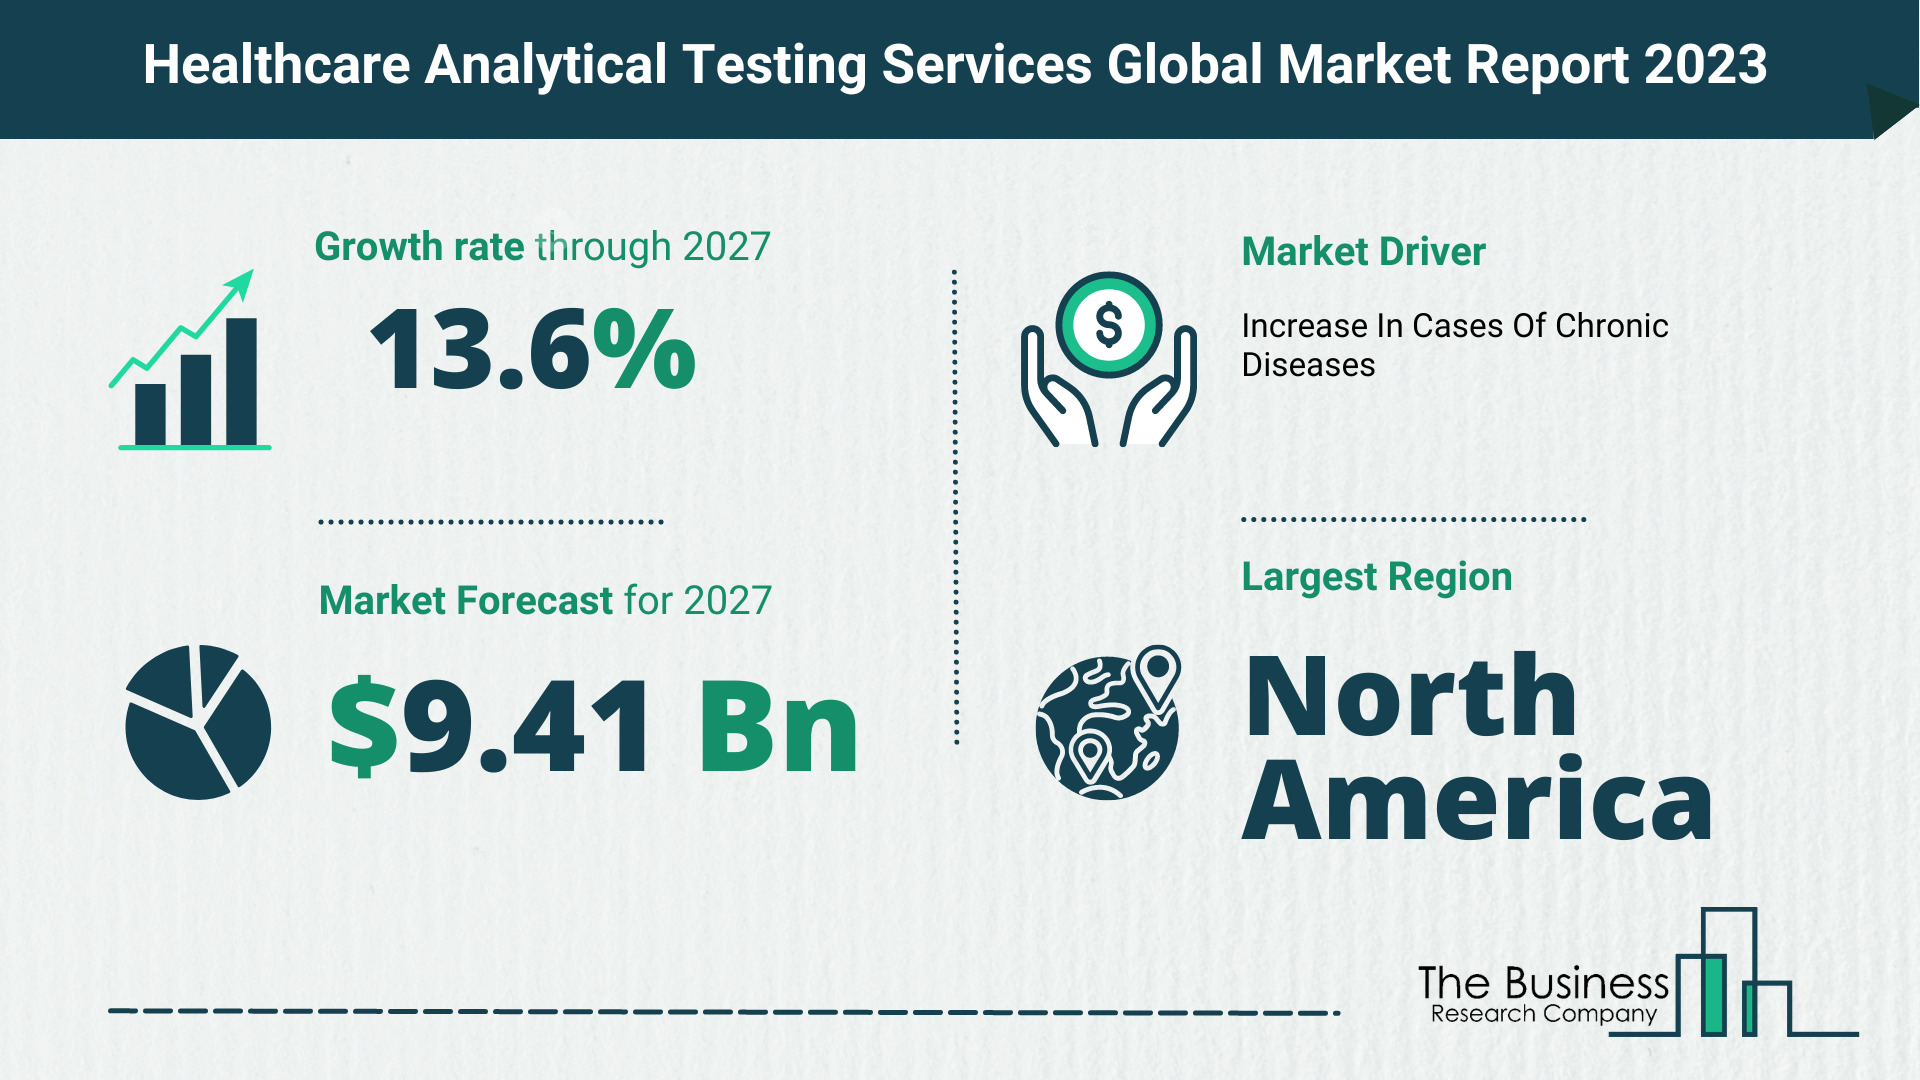 Global Healthcare Analytical Testing Services Market